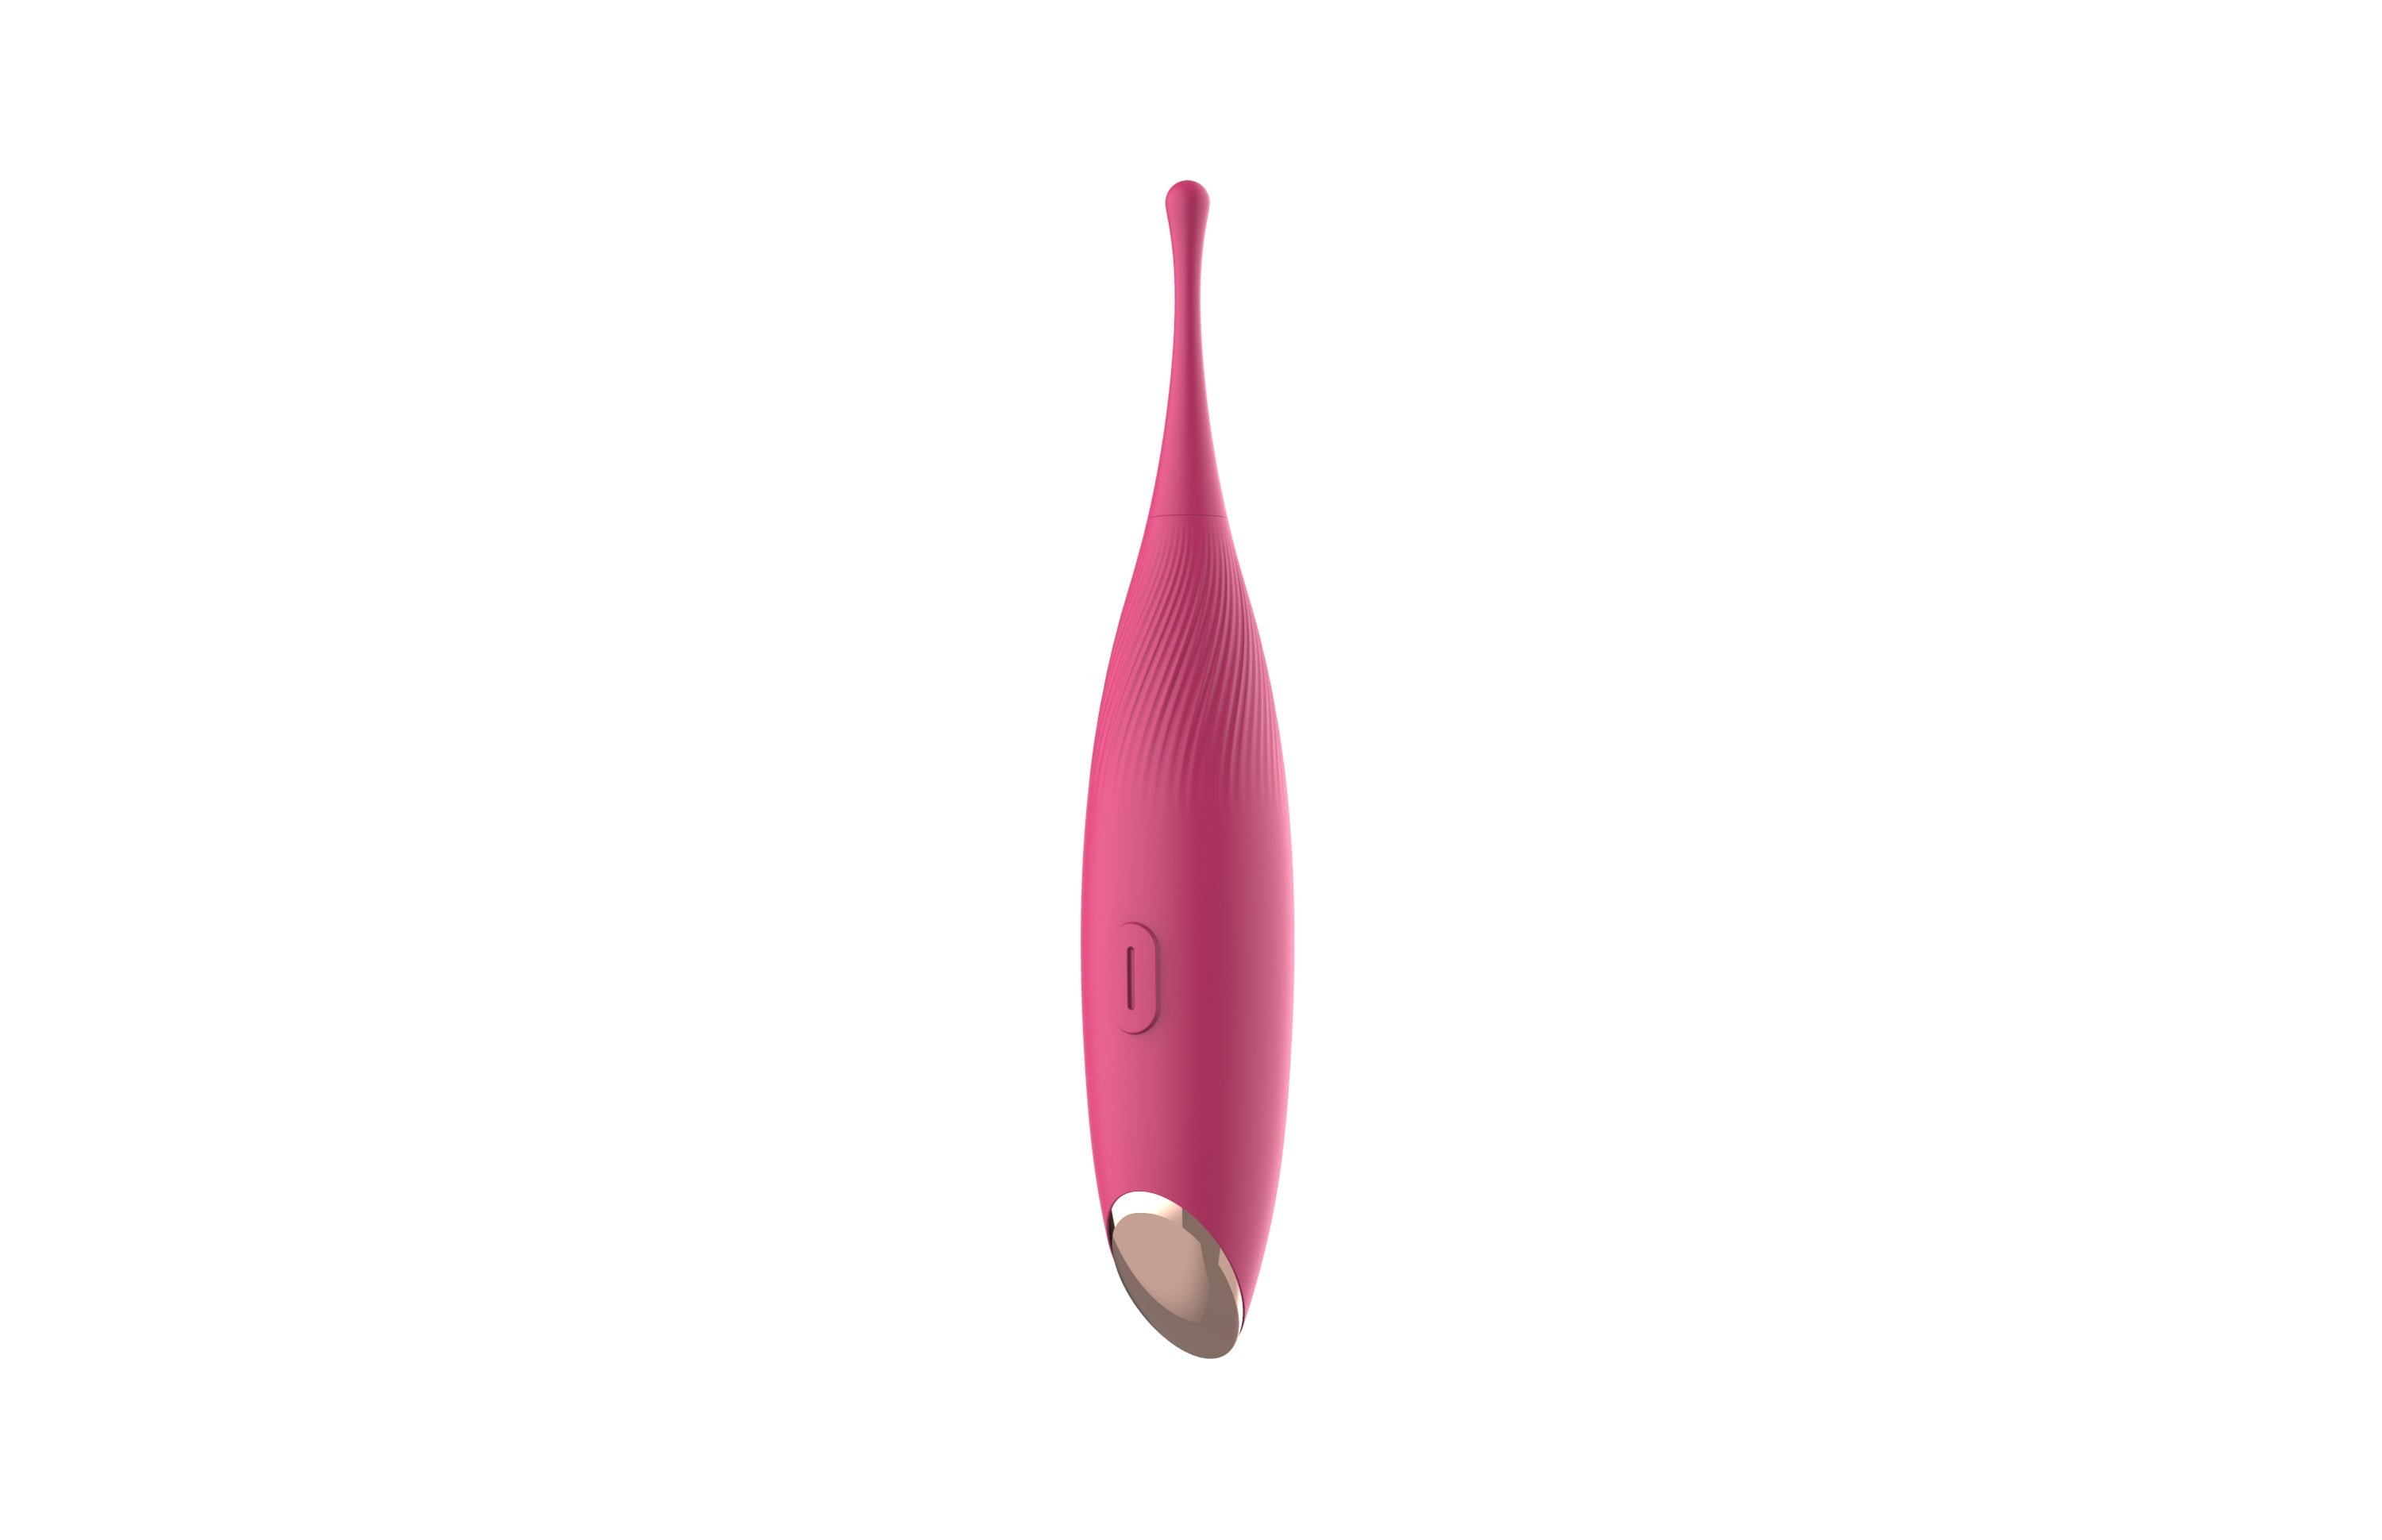 Crave G Spot Vibrator in Pink